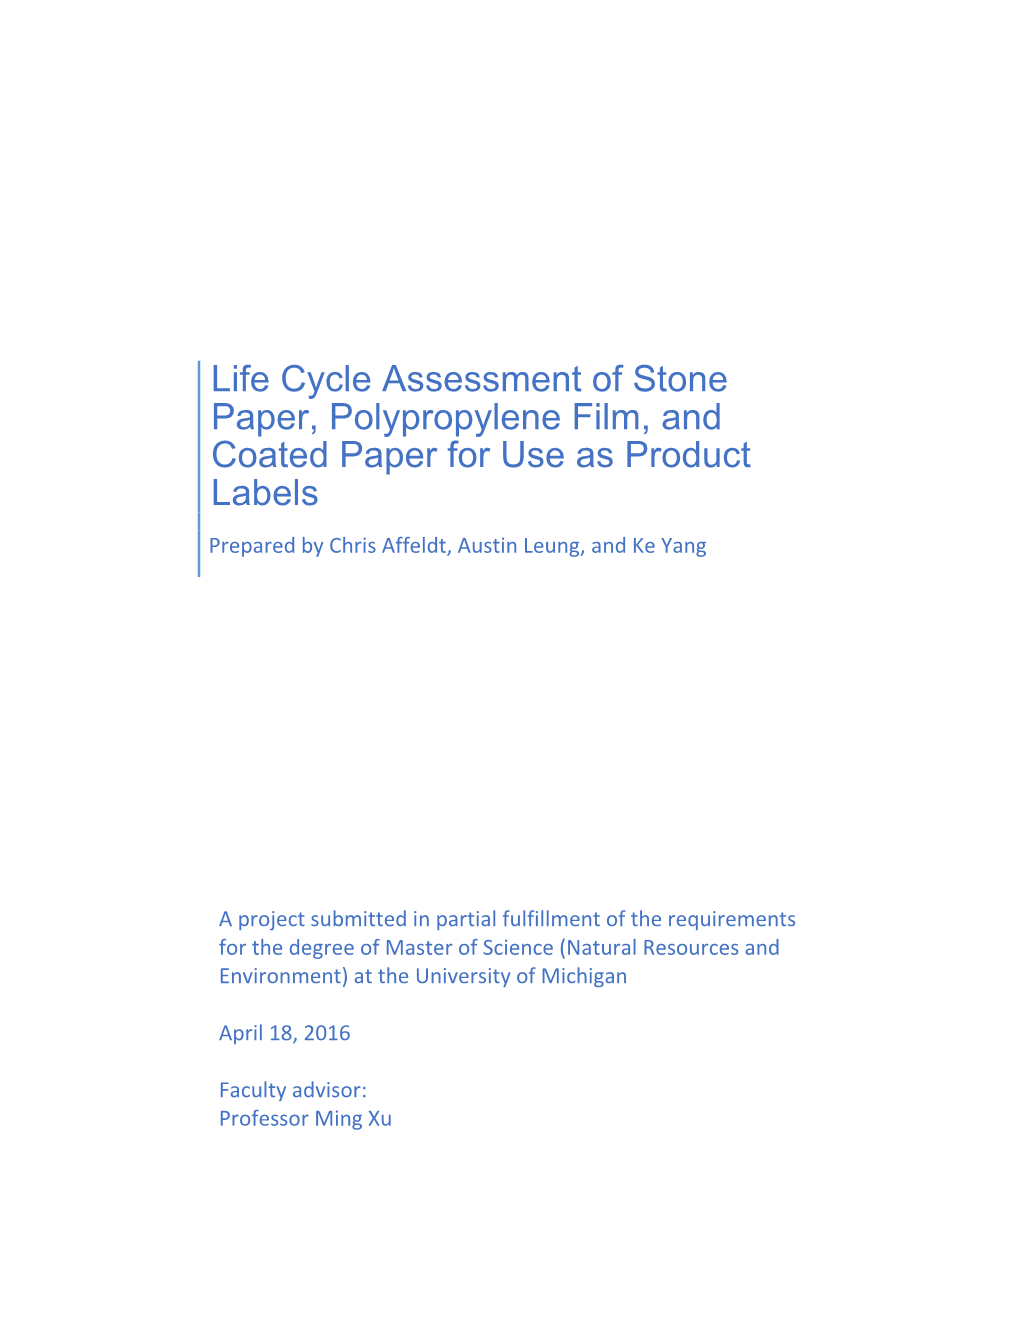 Life Cycle Assessment of Stone Paper, Polypropylene Film, and Coated Paper for Use As Product Labels Prepared by Chris Affeldt, Austin Leung, and Ke Yang